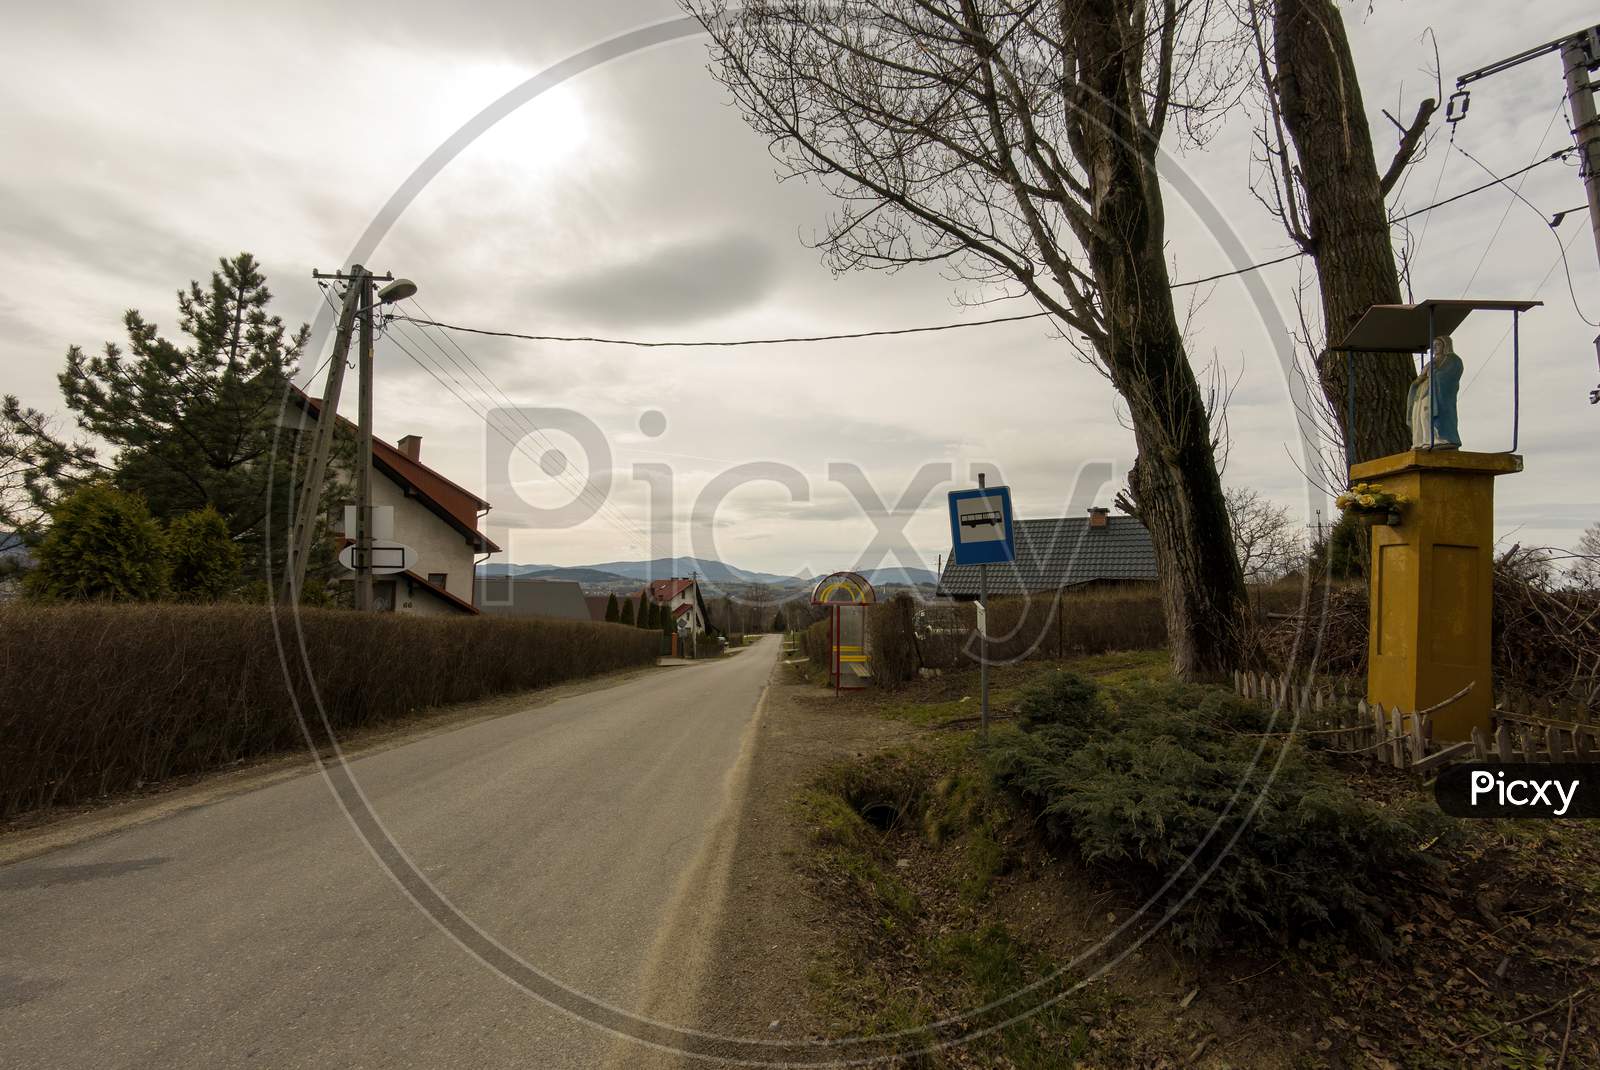 Limanowa, South Poland - April 01, 2021: View Of Country Side Showing Narrow Road And Bus Stop Located In Lysa Gora Beskid Wyspowy In The Polish Mountains